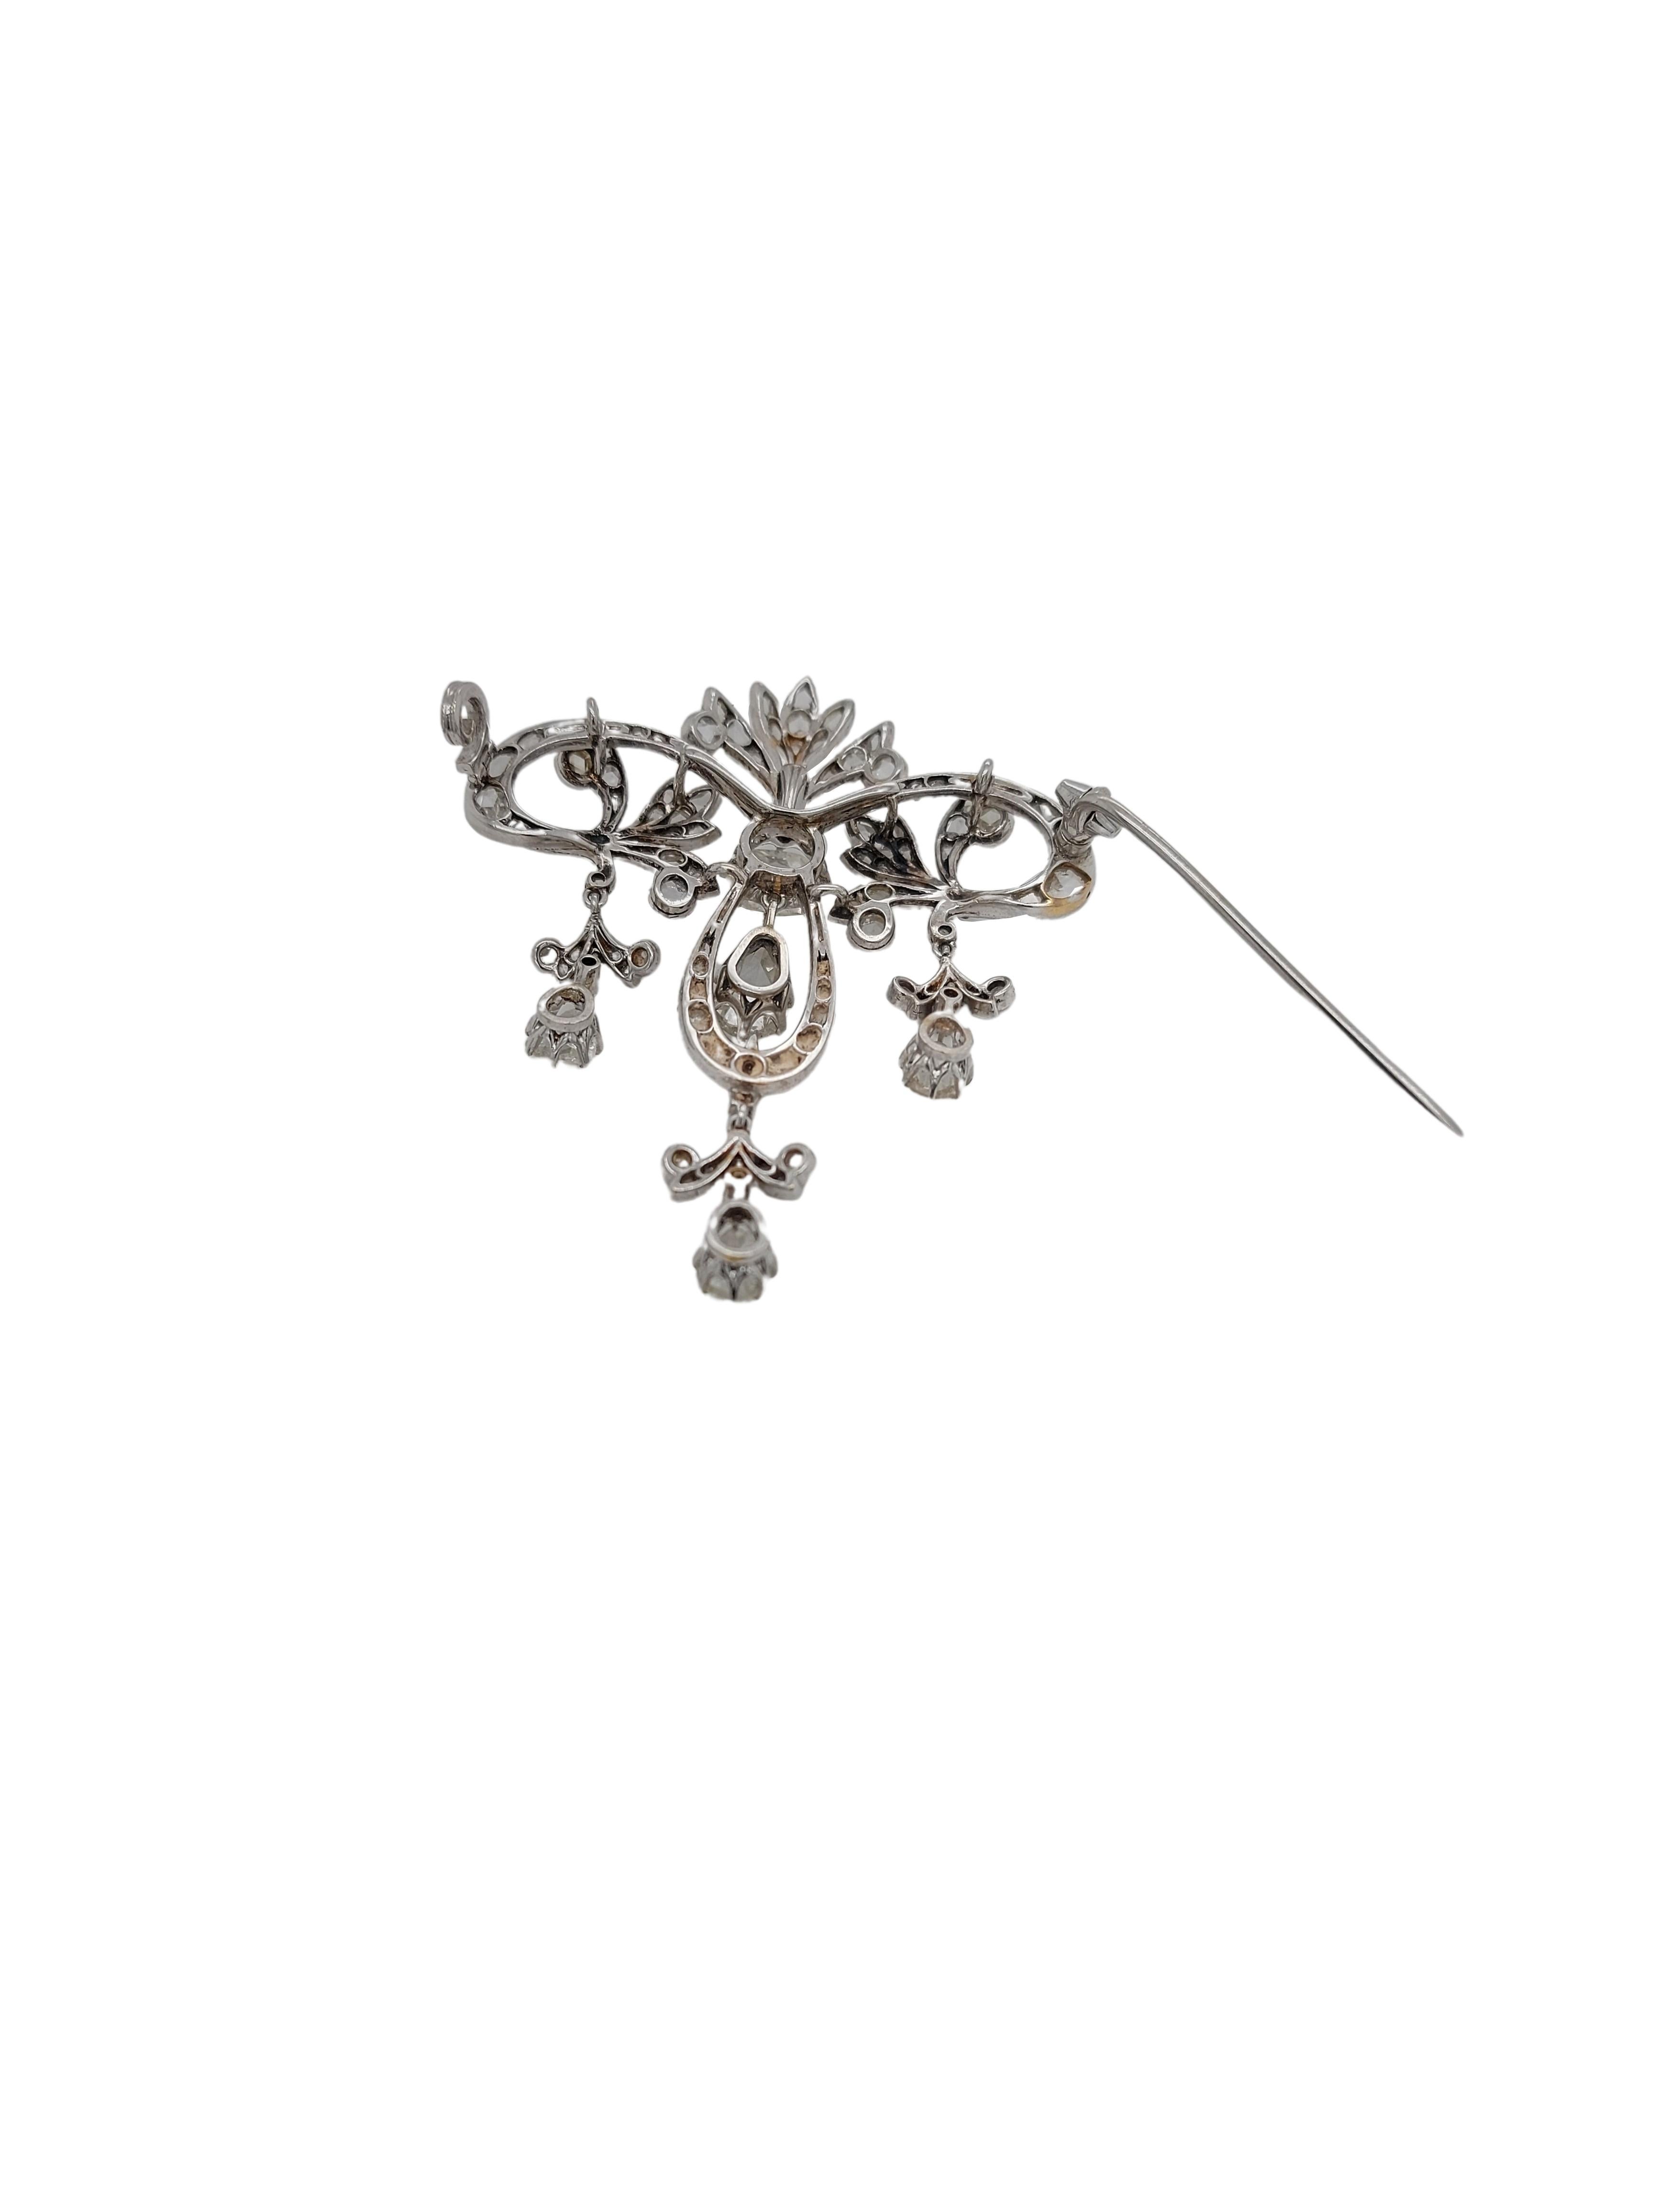 Platinum Brooch / Necklace with Rose Cut Diamonds For Sale 7